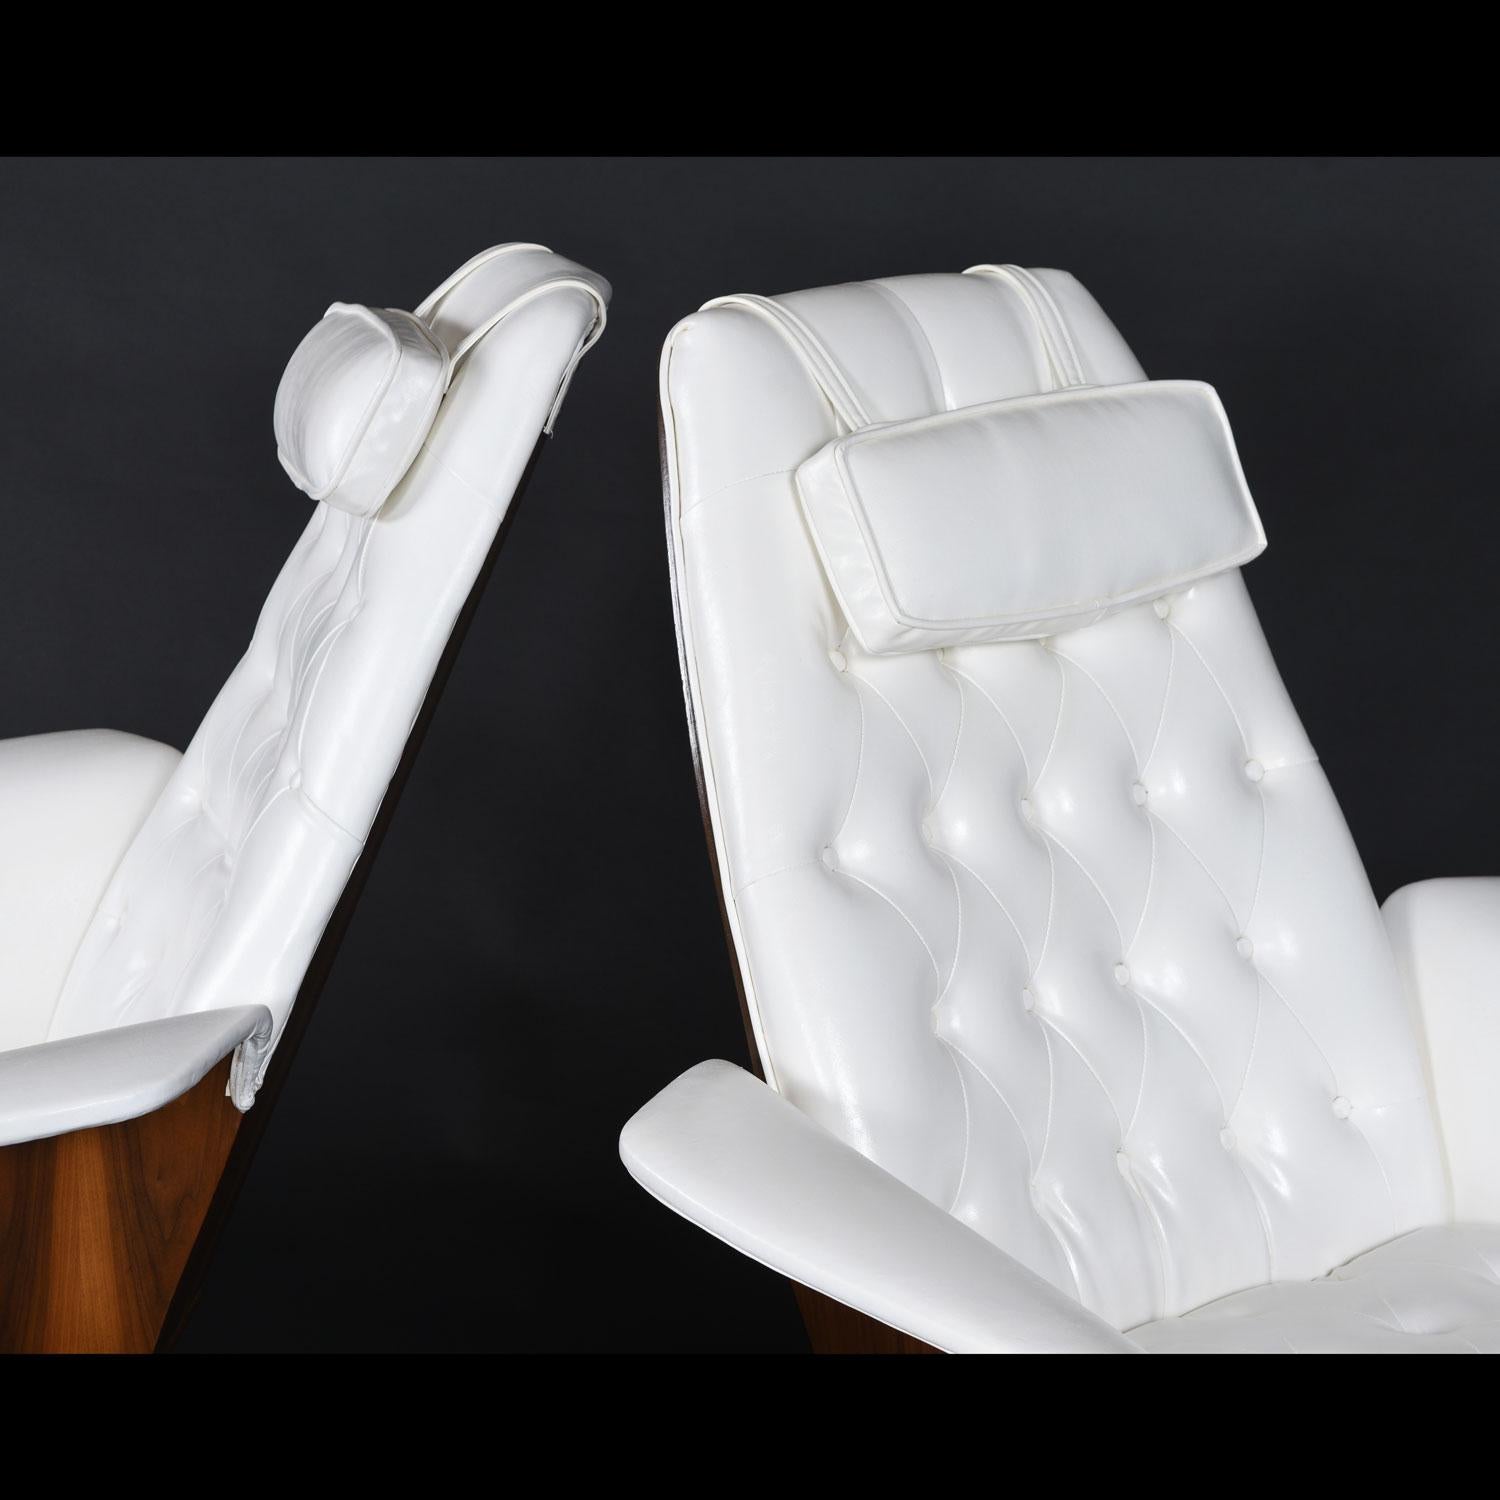 Restored Pair of Bent Ply Faux White Tufted Leather George Mulhauser Mr. Chairs For Sale 3